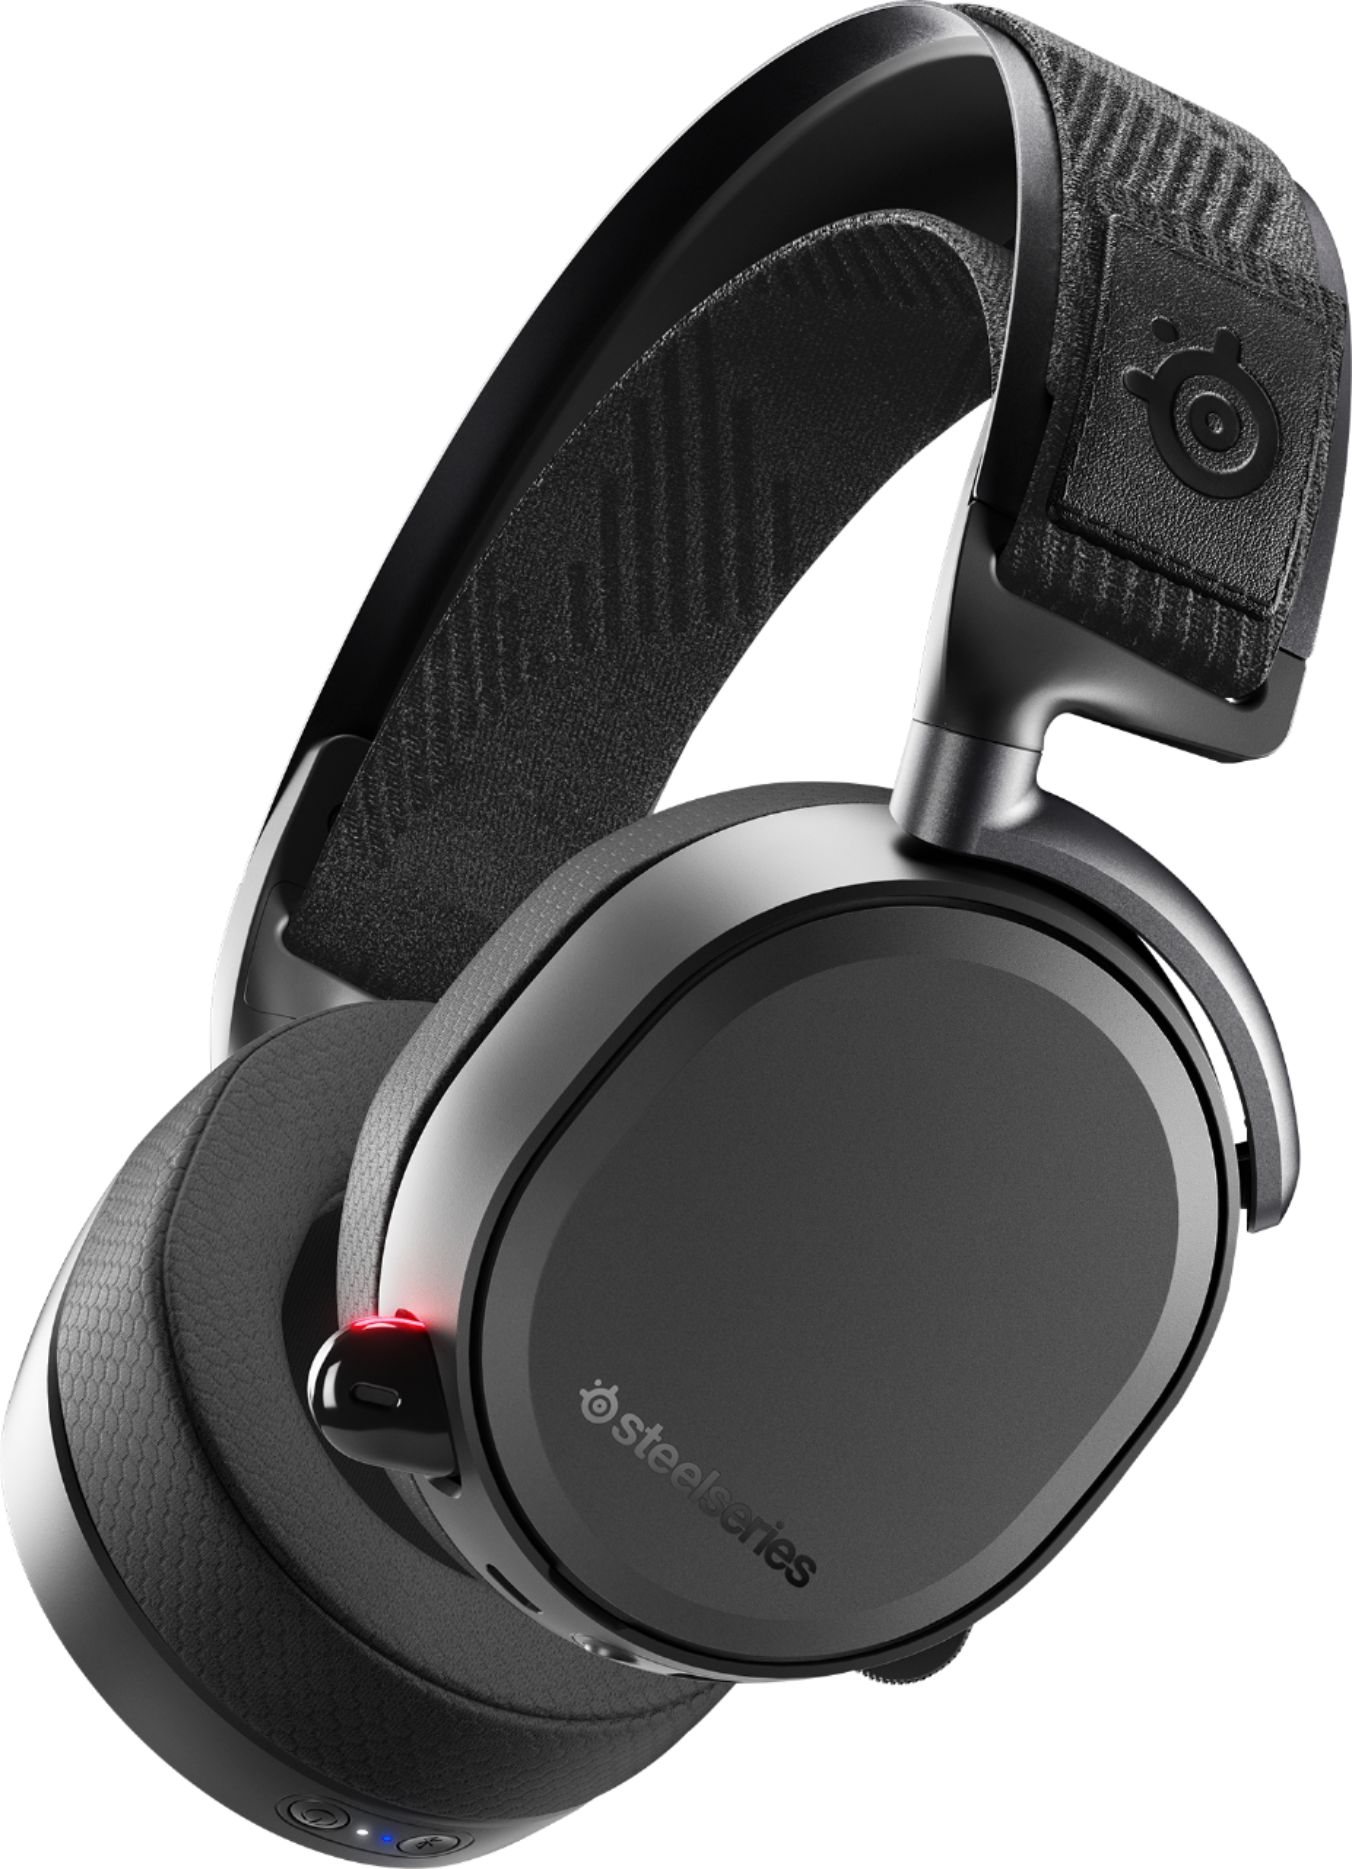 SteelSeries - Arctis Pro Wireless DTS Headphone:X v2.0 Surround Sound Gaming Headset for PS4 and PC - Black